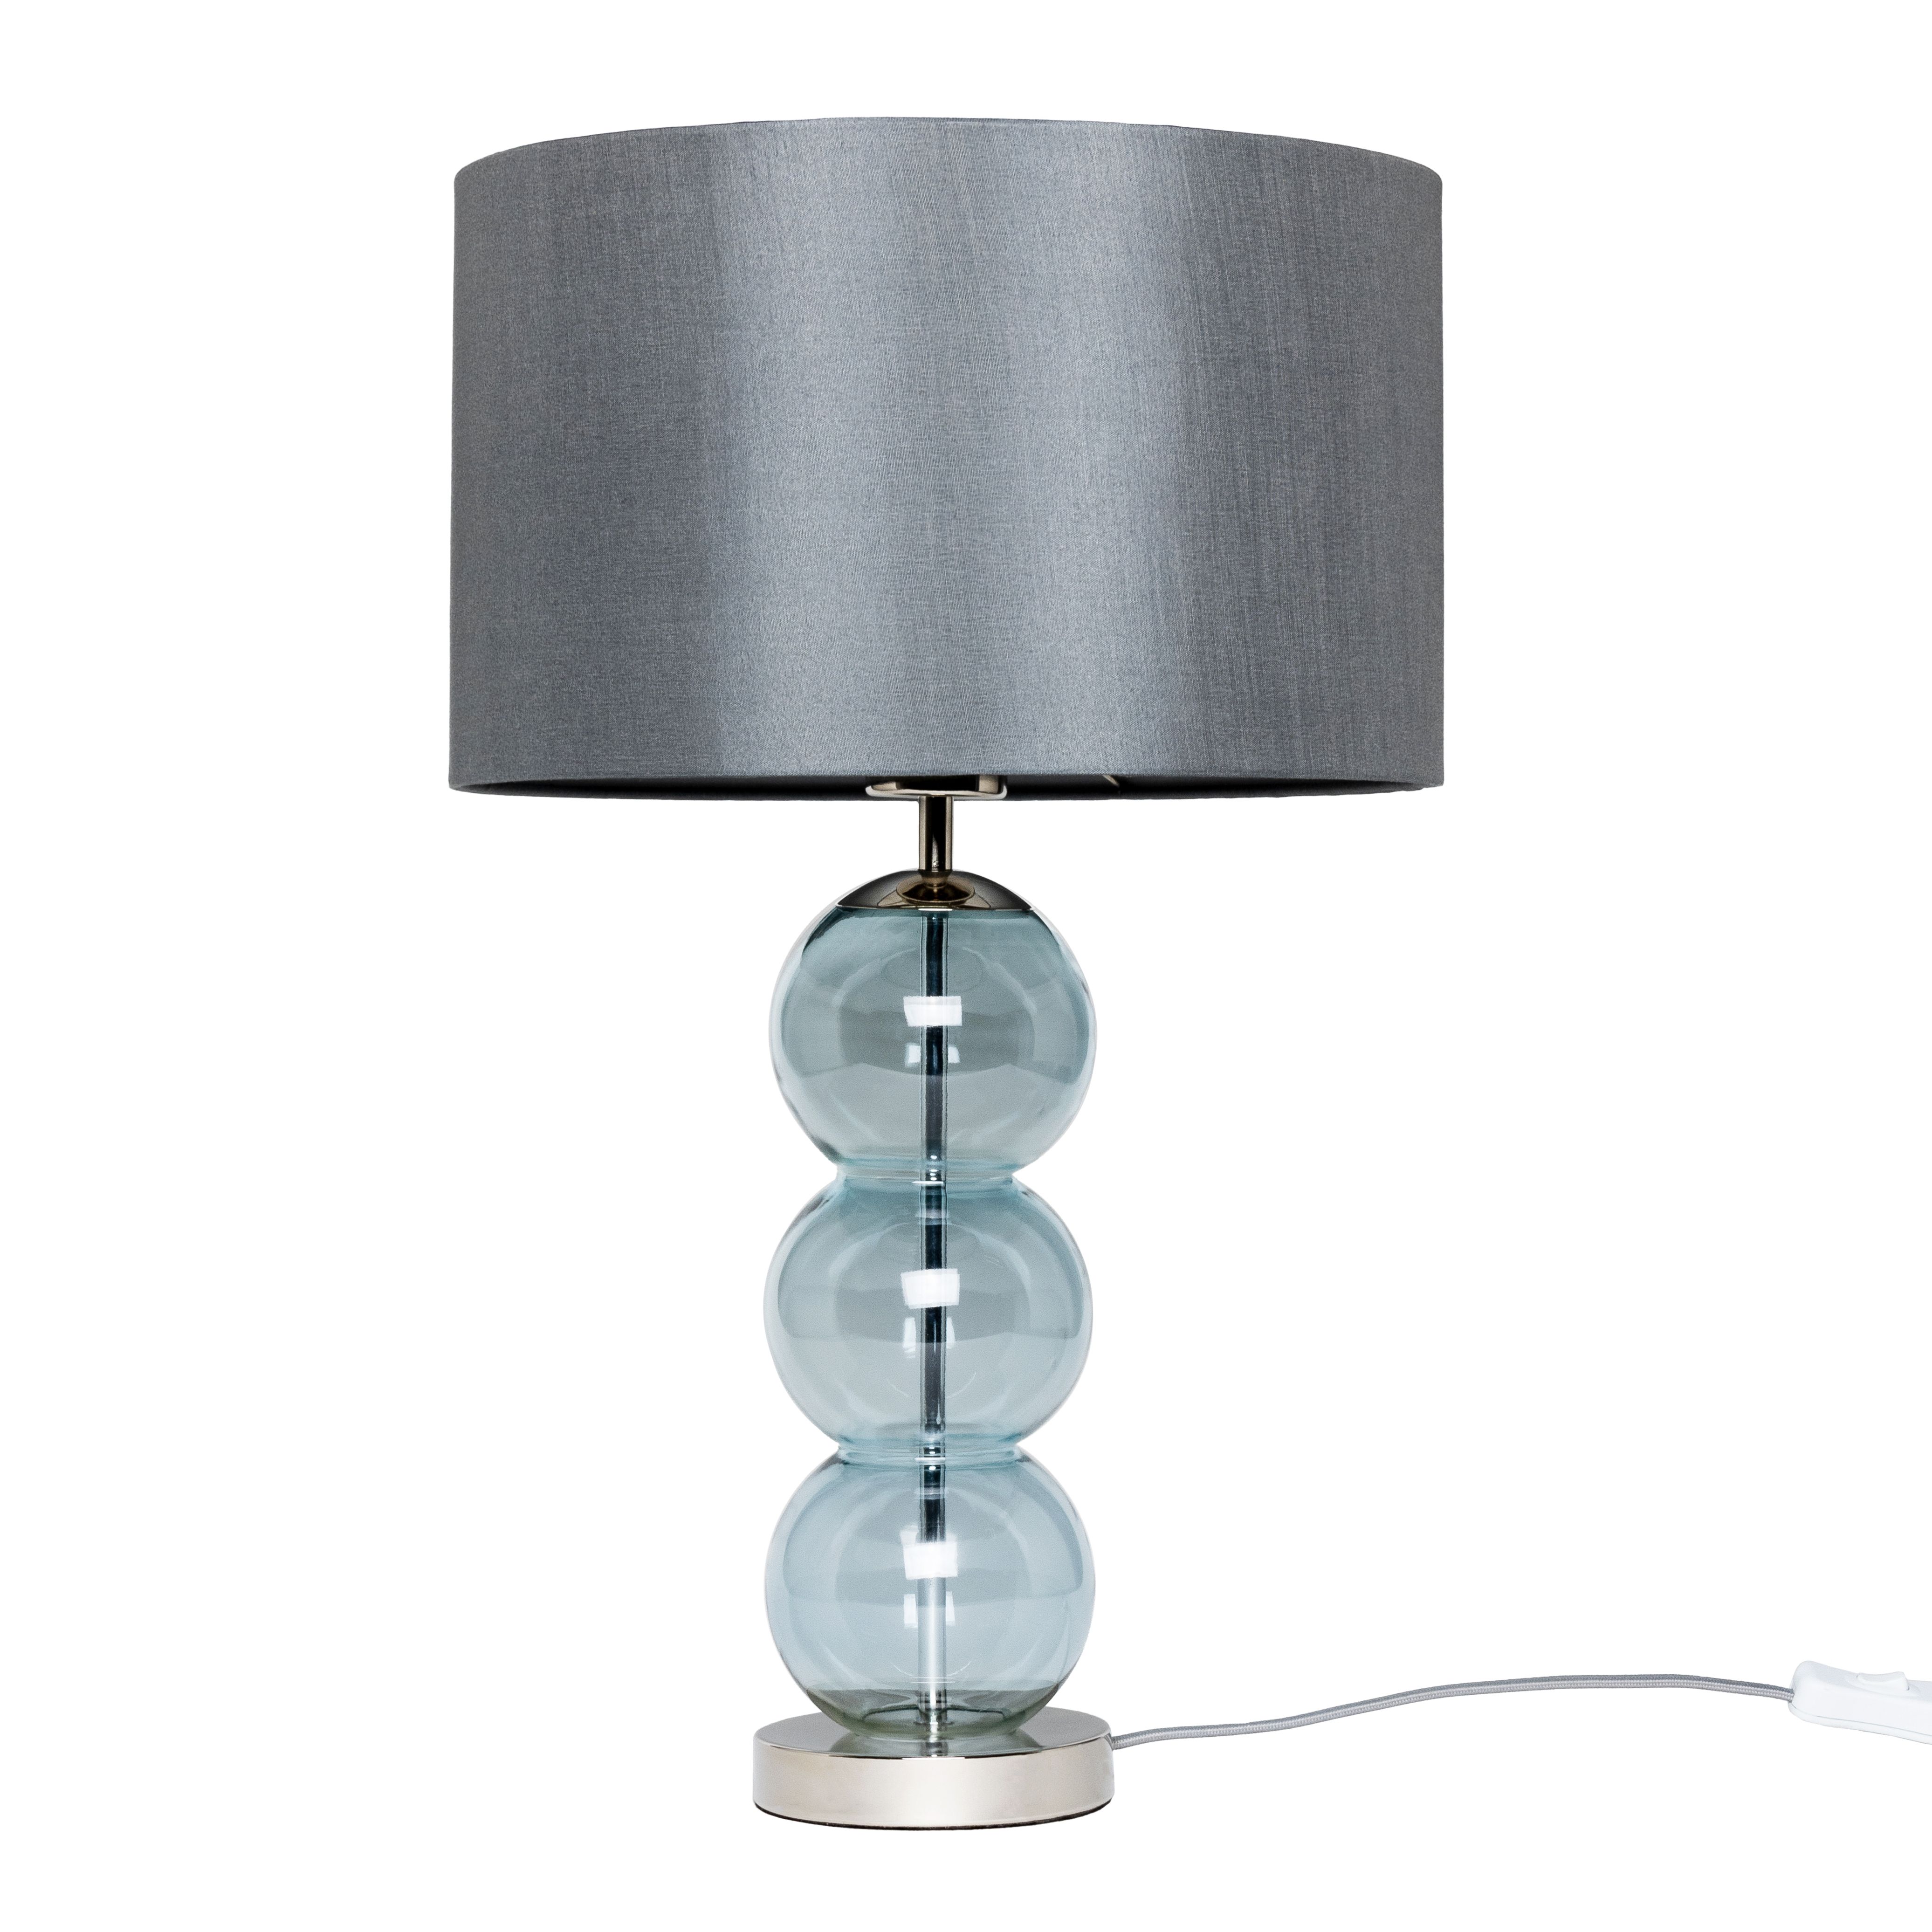 Inlight Remo Polished Chrome effect Round Table lamp